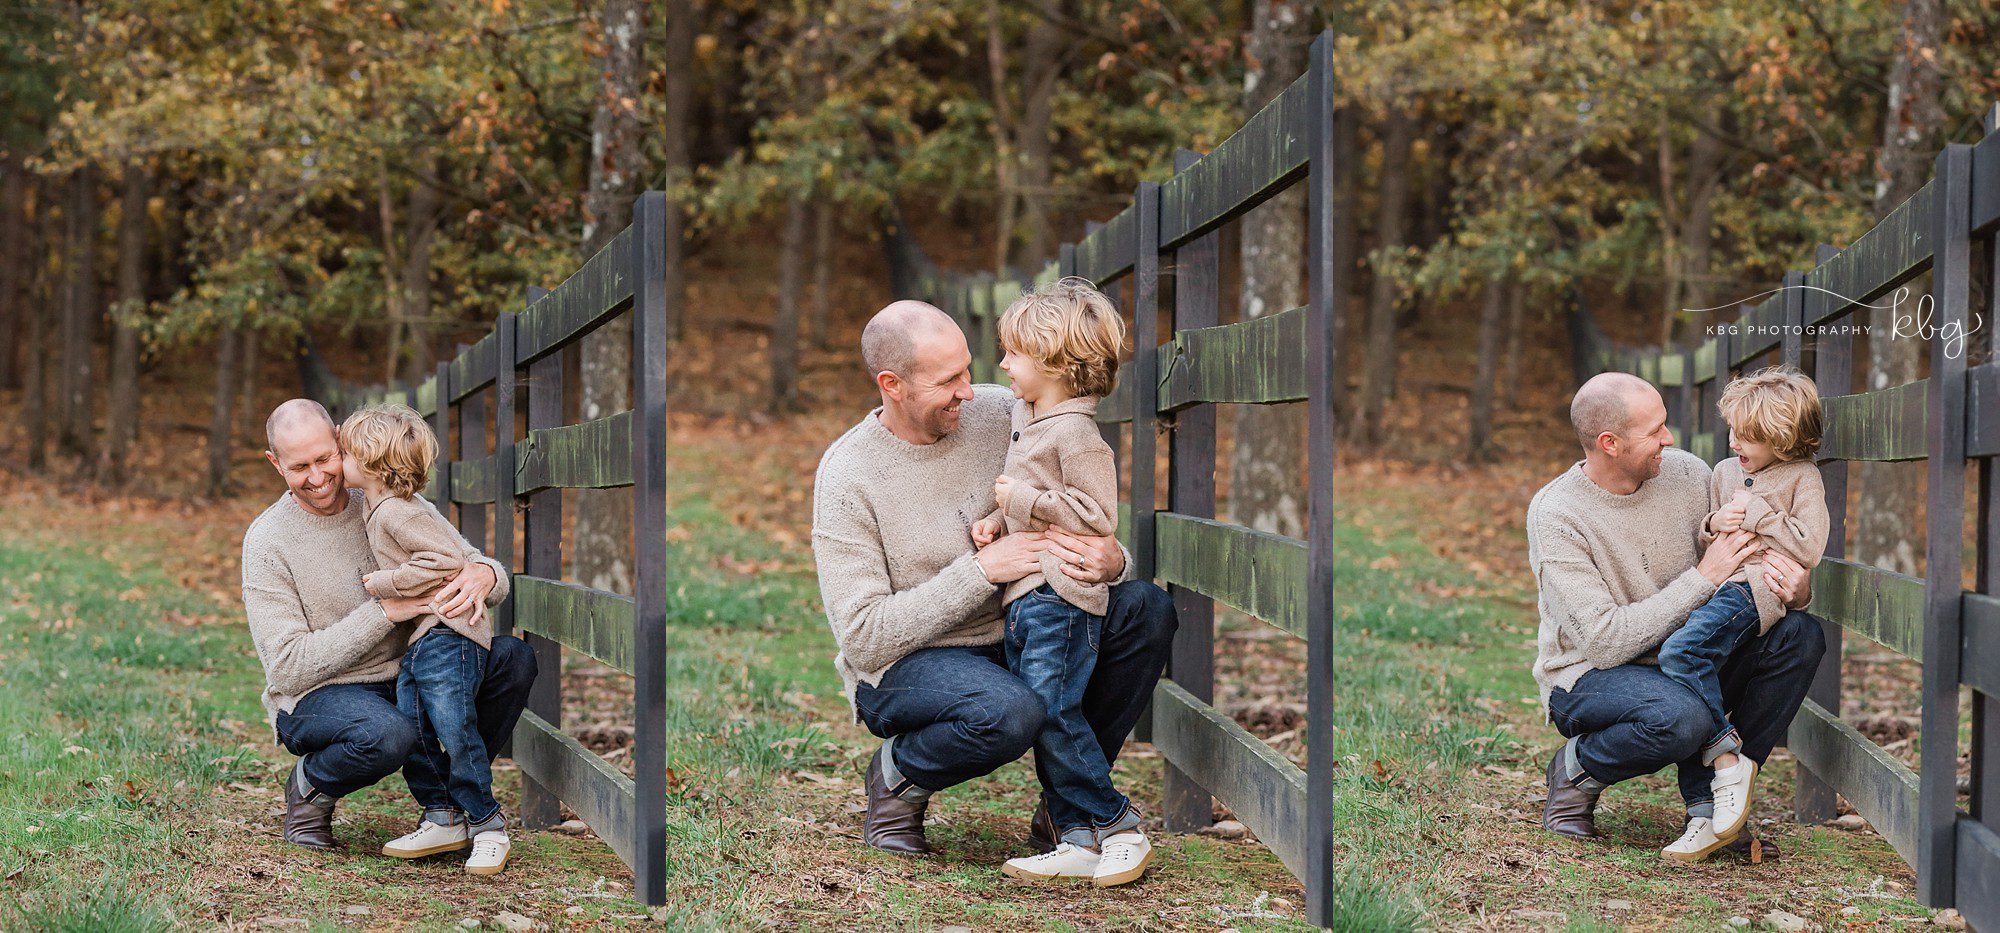 father and son playing together - Atlanta photographer